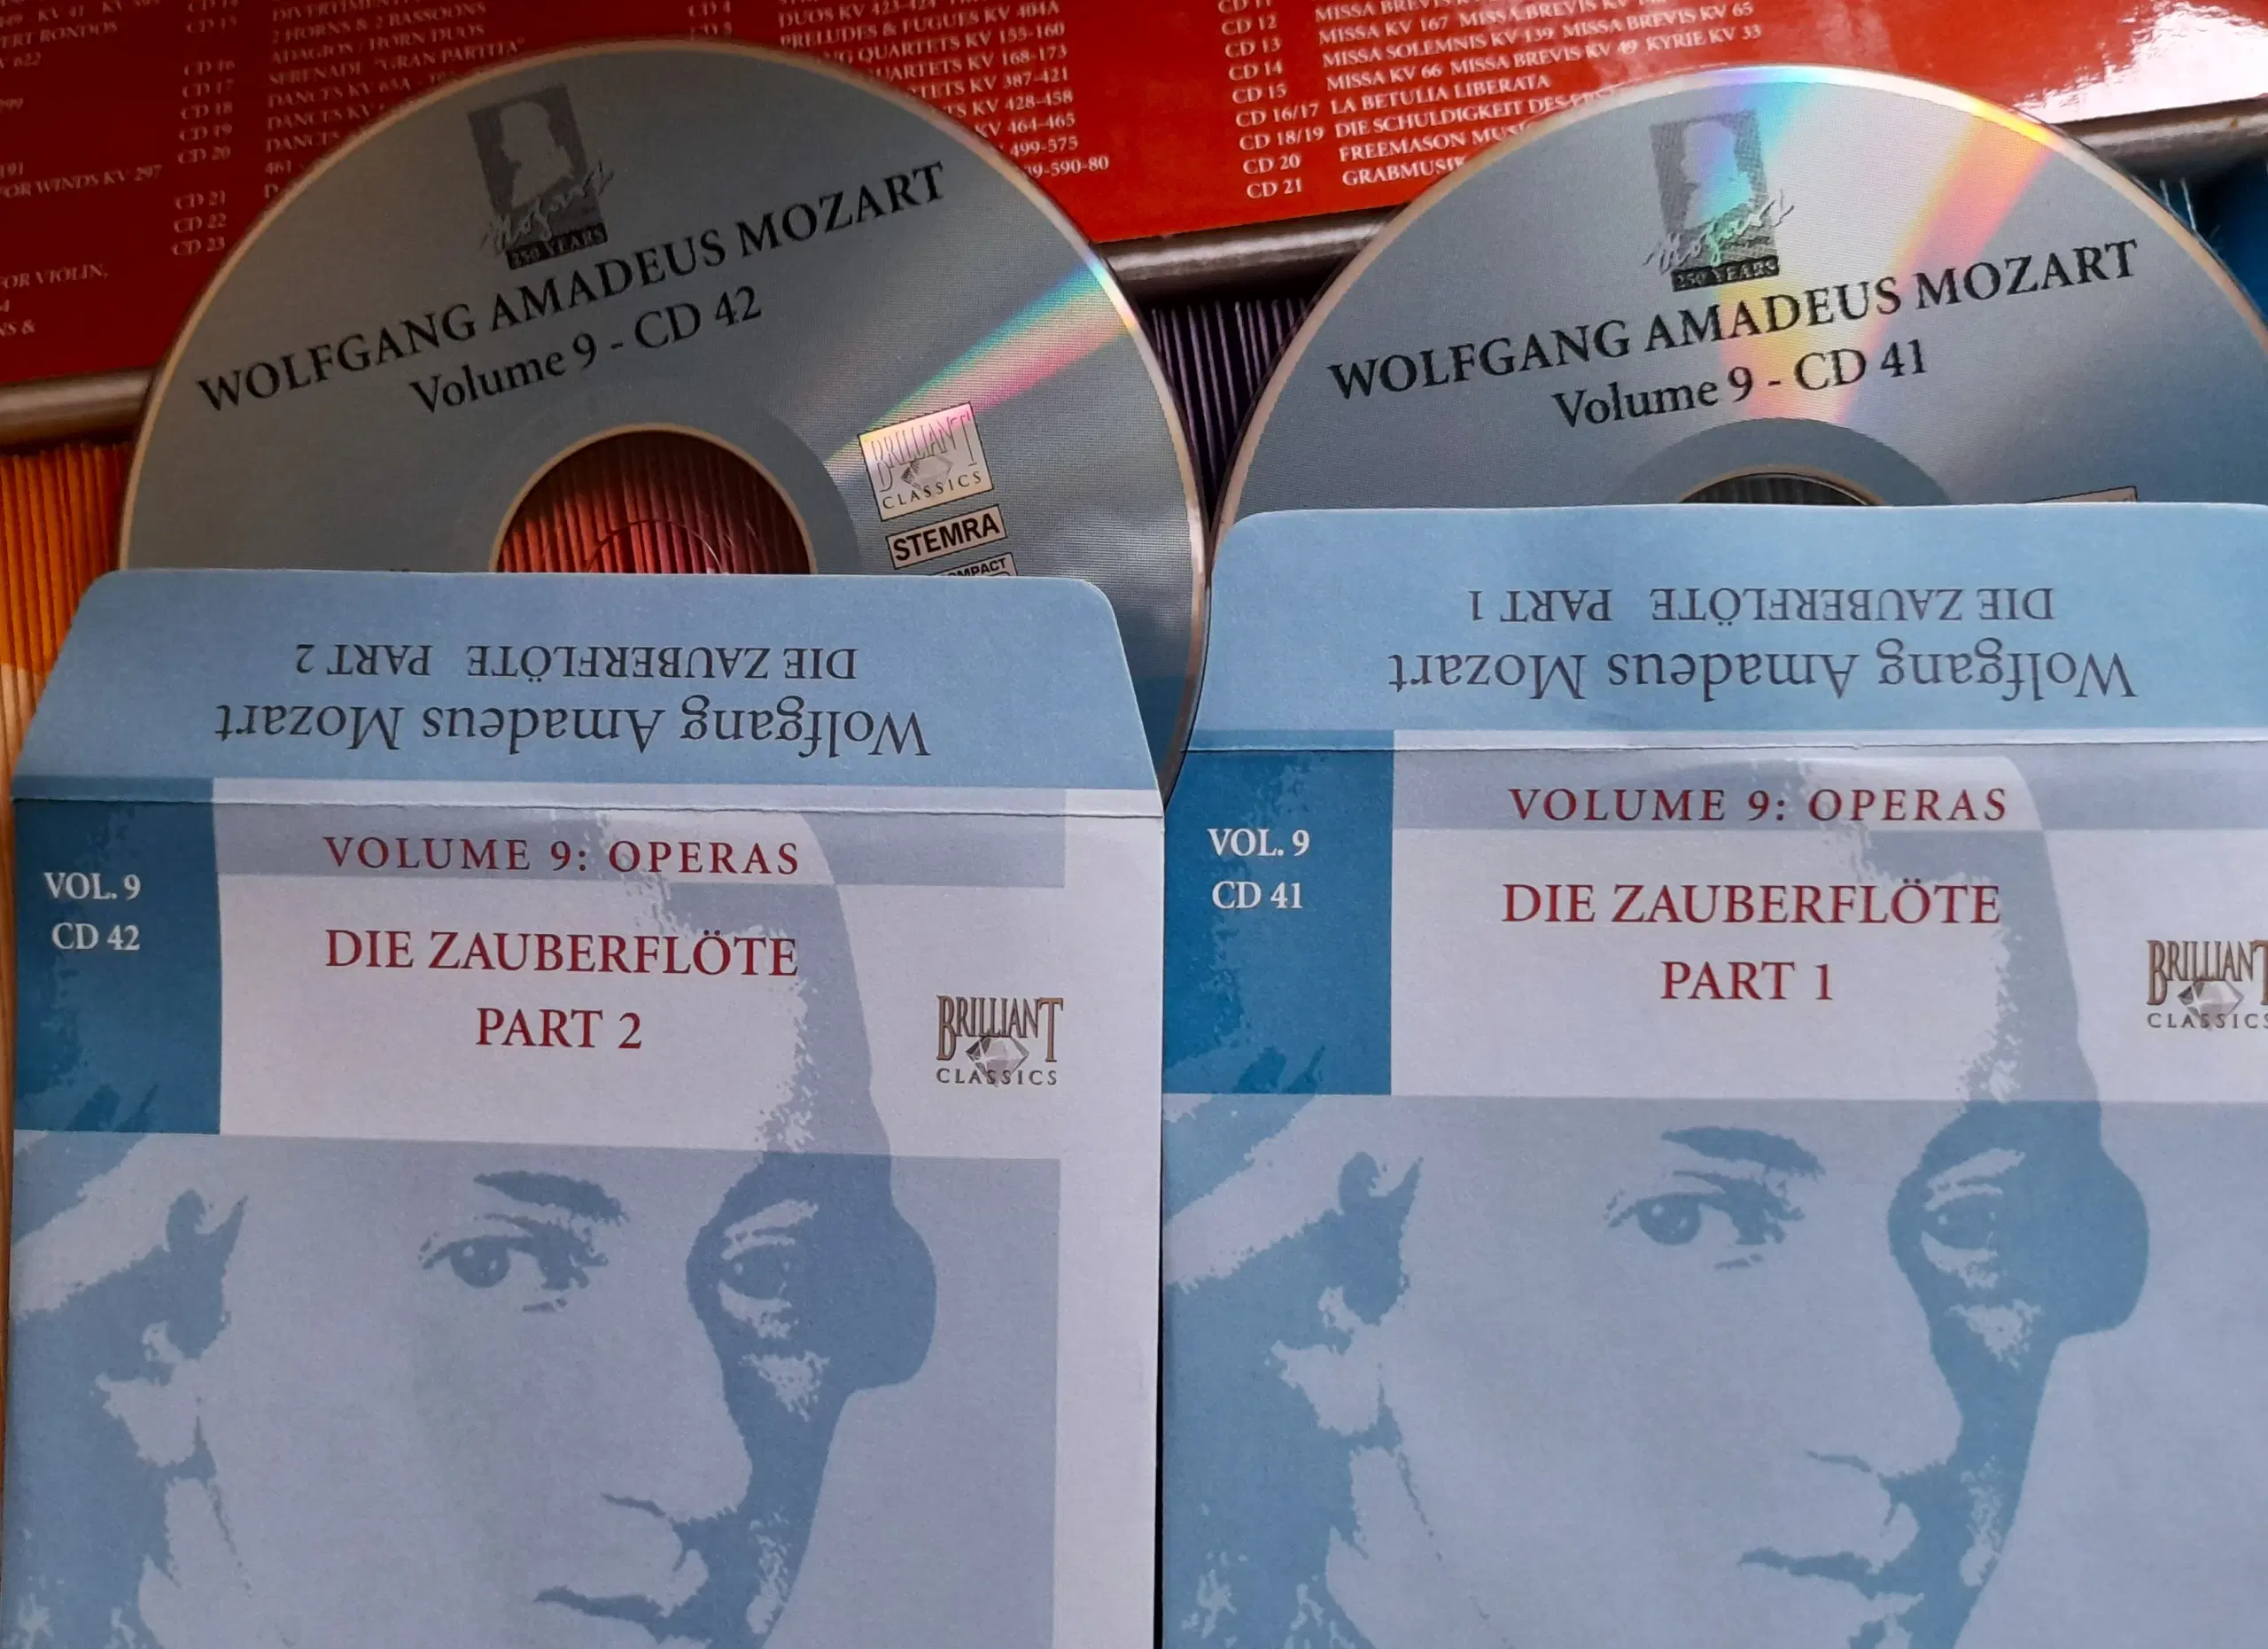 WOLFGANG AMADEUS MOZART COMPLETE WORKS 170! CD BOX